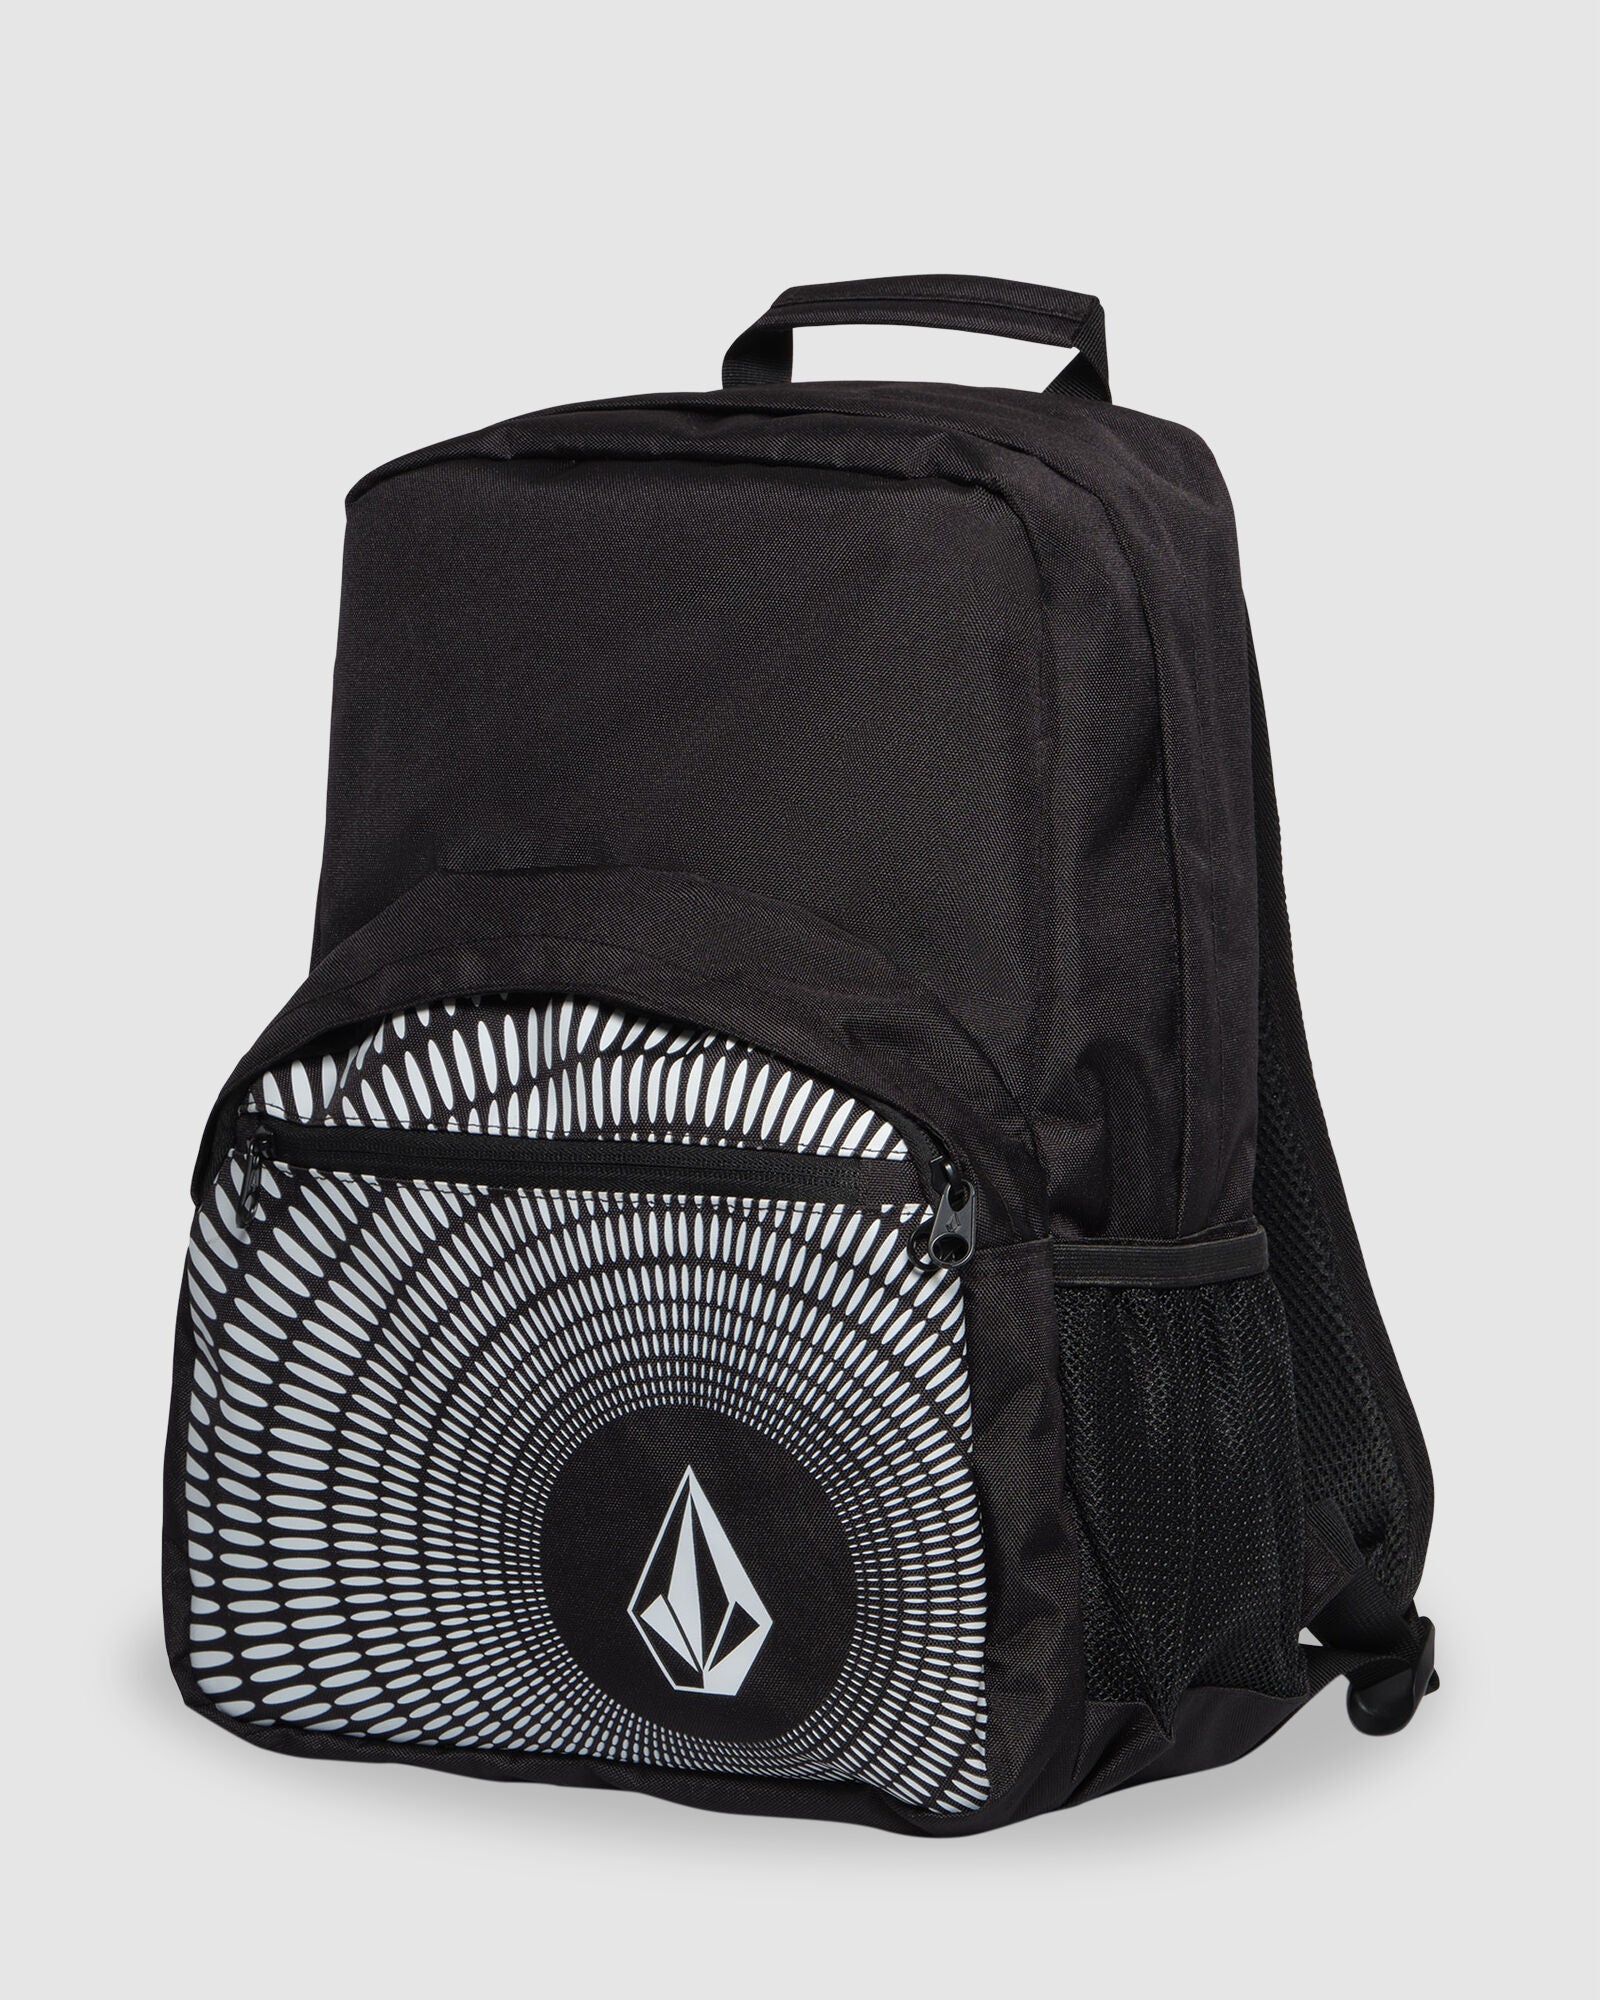 ICONIC STONES BACK PACK BLACK VOLCOM MENS BACK TO SCHOOL ACCESSORIES 